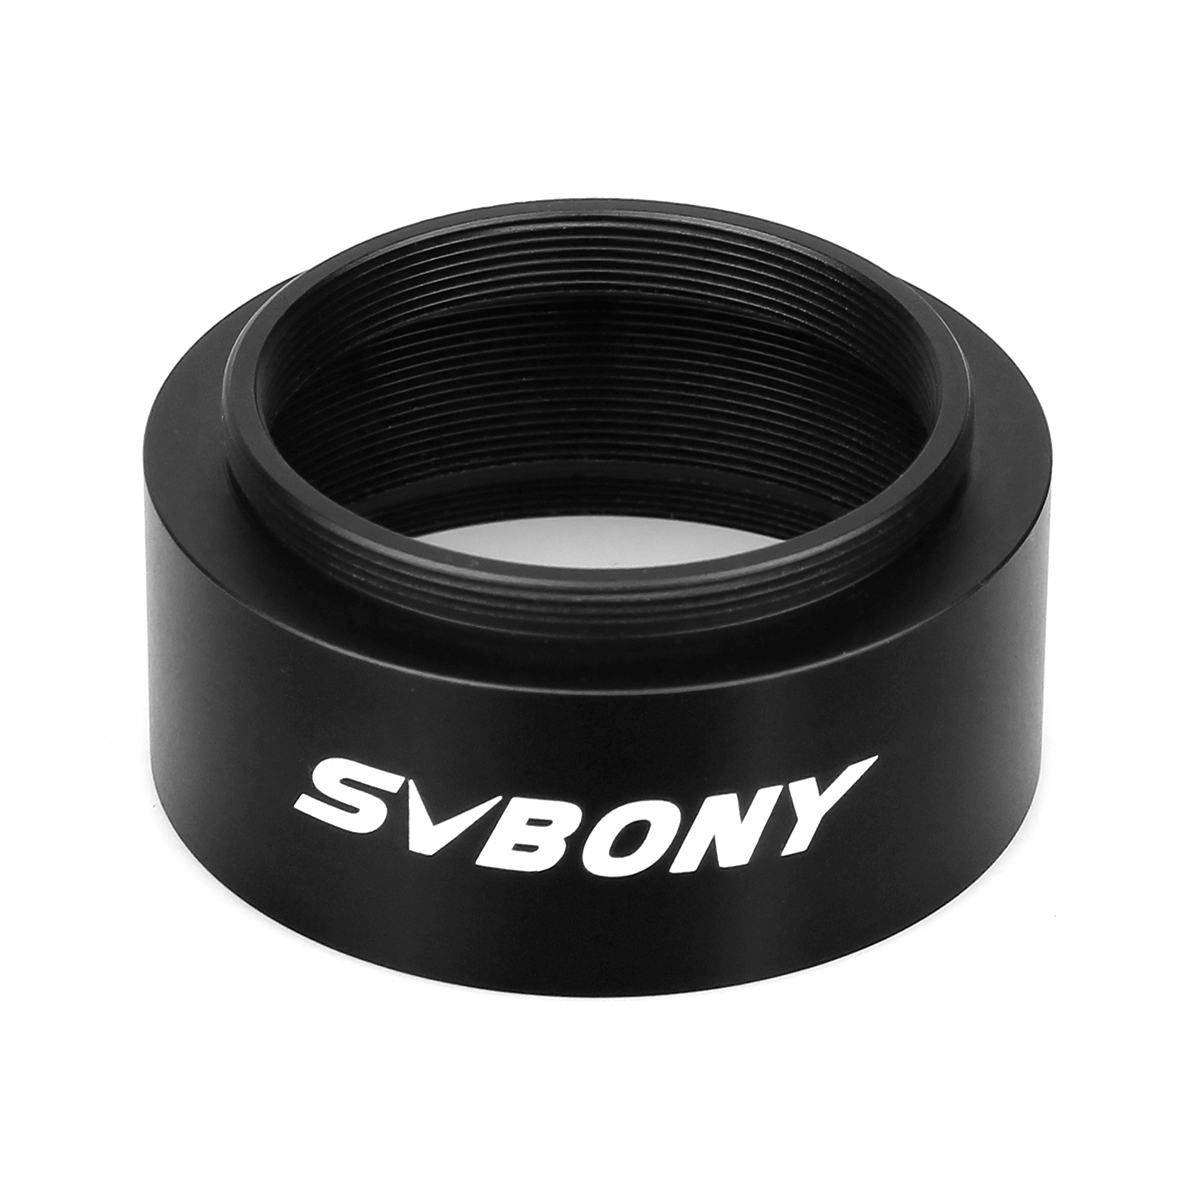 SVBONY-2quot-T-to-M42075-Thread-Astronomy-Telescope-Mount-Adapters-Accept-2quot-Filter-1842467-2